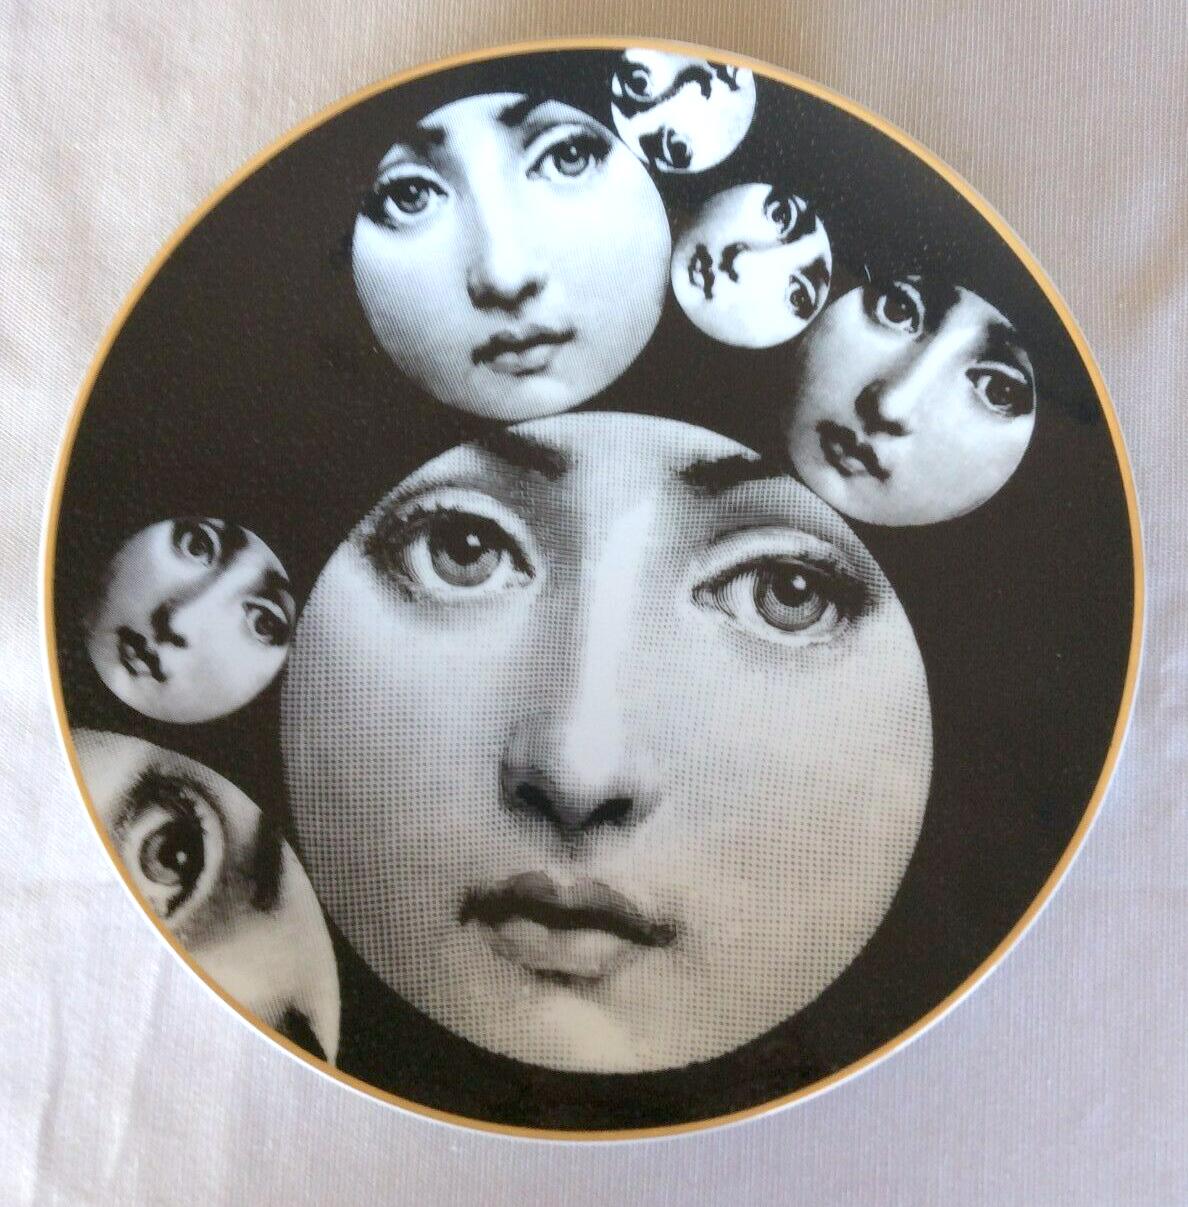 Piero Fornasetti Rosenthal Porcelain Themes & Variations Plate, Motiv 34 In Good Condition For Sale In Downingtown, PA